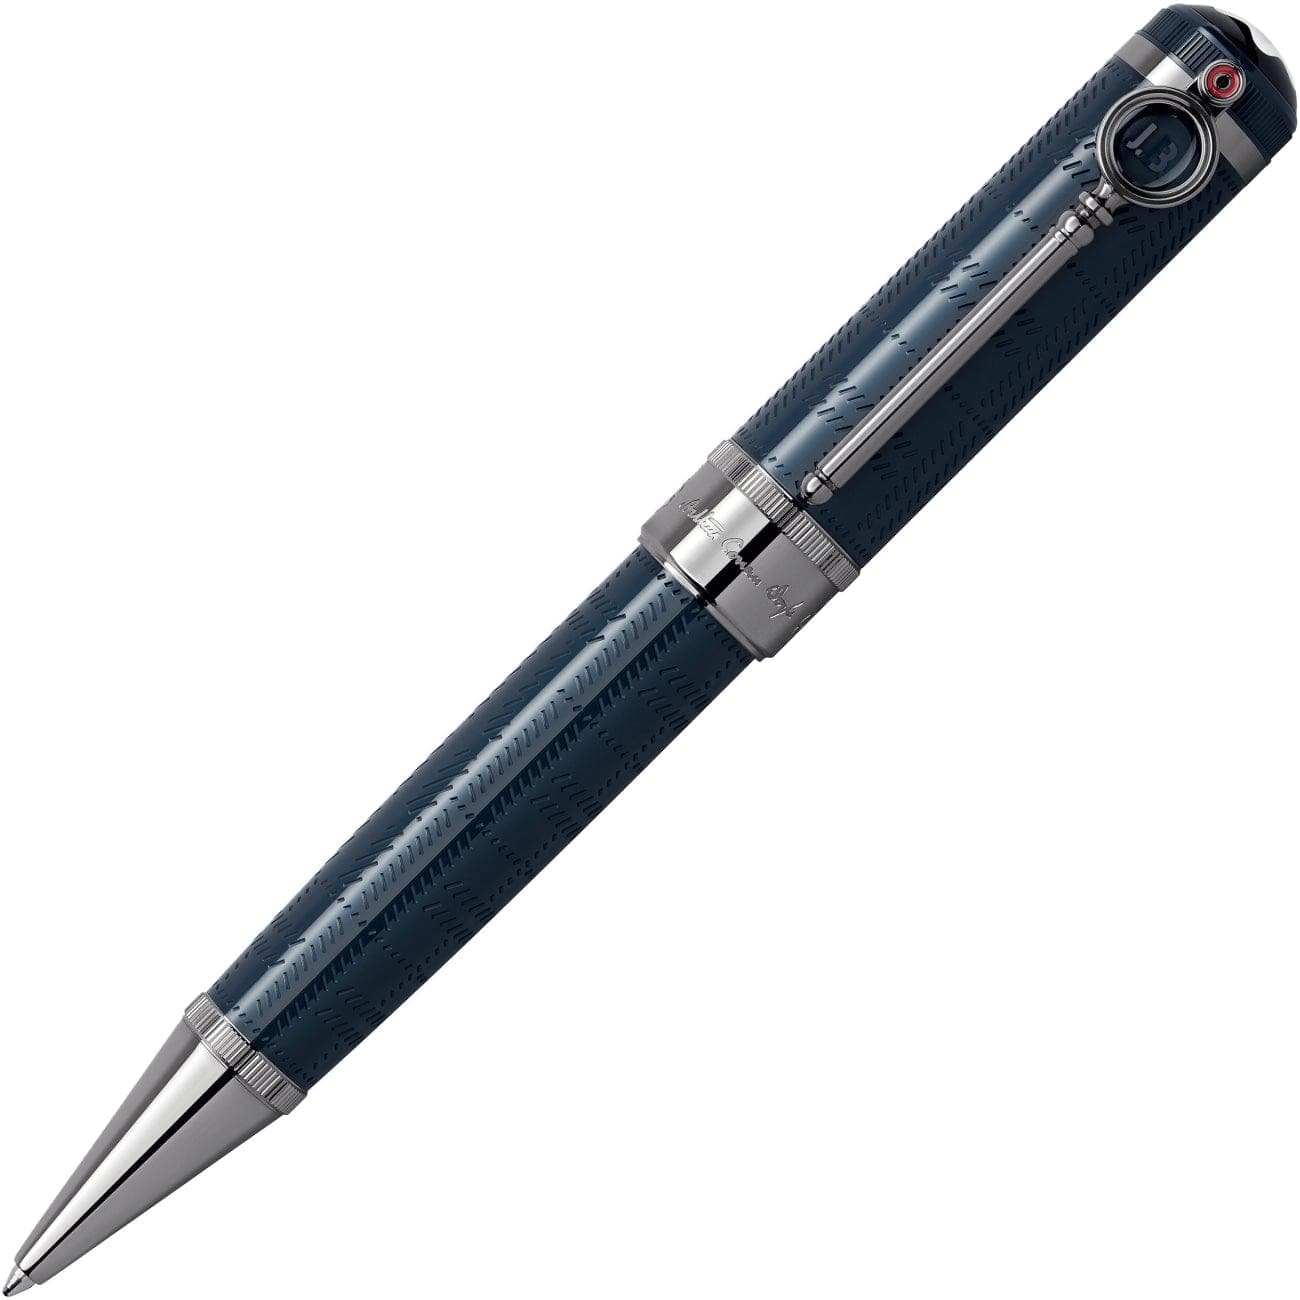 https://cdn.shopify.com/s/files/1/0014/5686/5316/products/montblanc-writers-edition-sir-arthur-conan-doyle-limited-accessories-manfredi-jewels-753.jpg